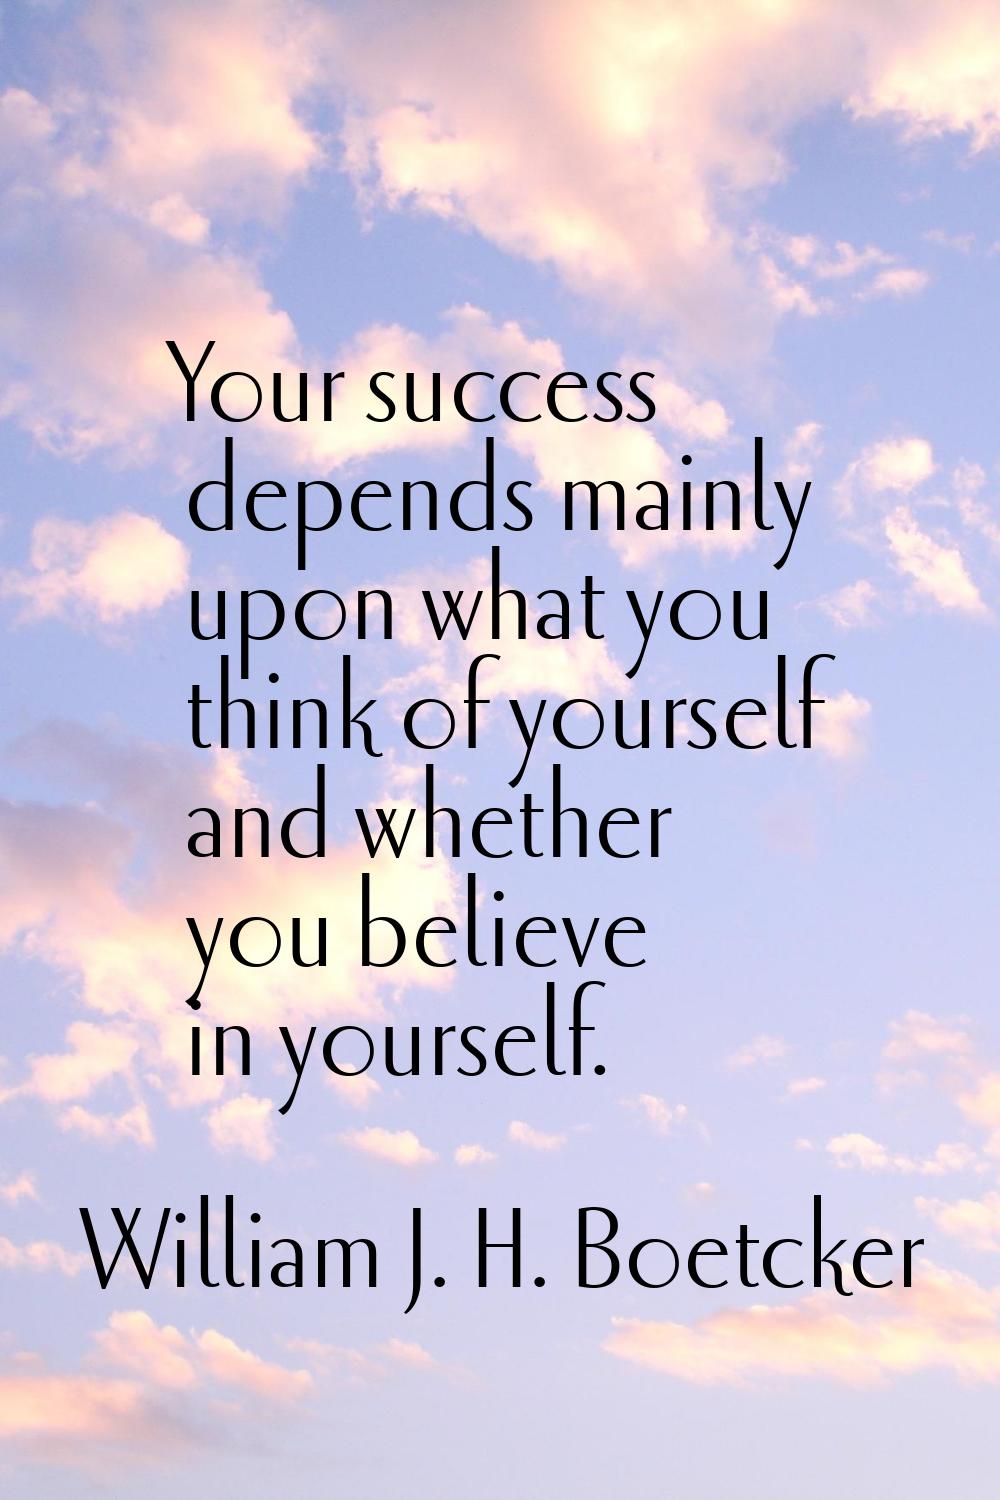 Your success depends mainly upon what you think of yourself and whether you believe in yourself.